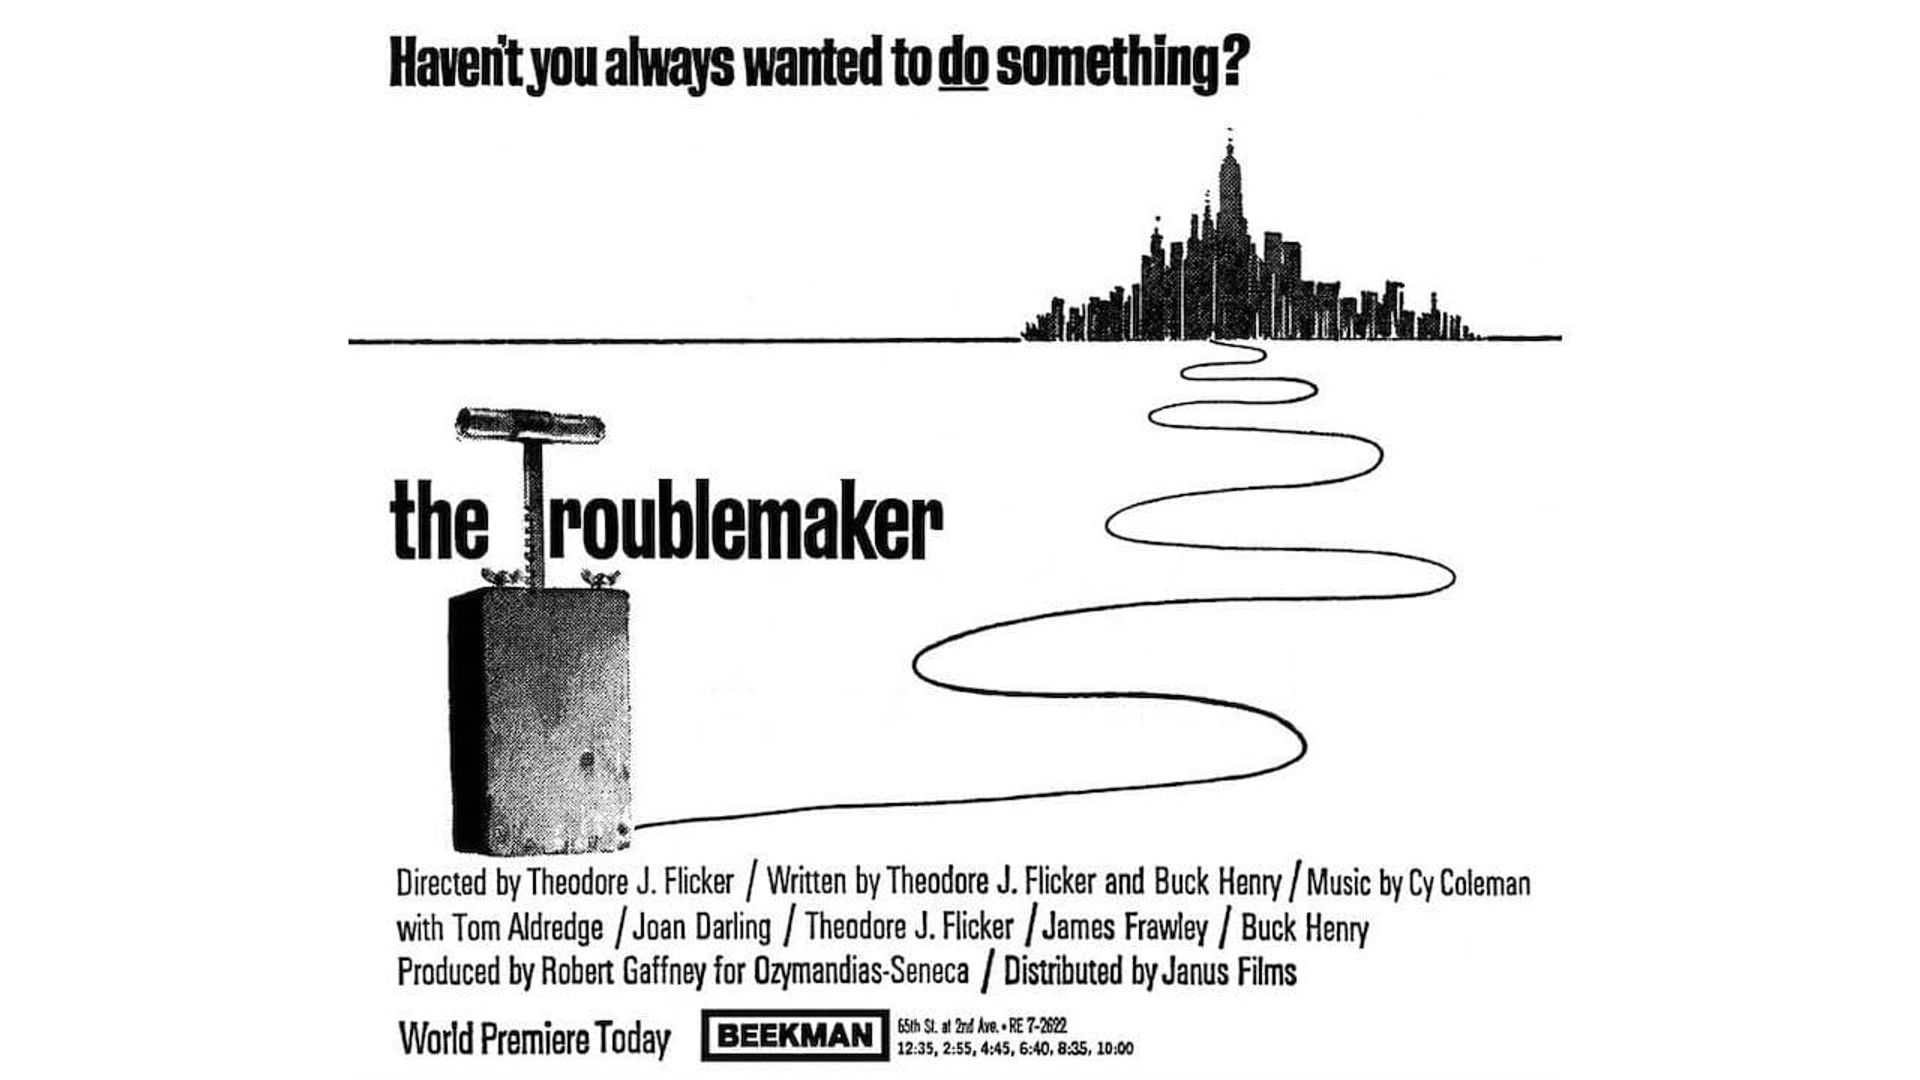 The Troublemaker background